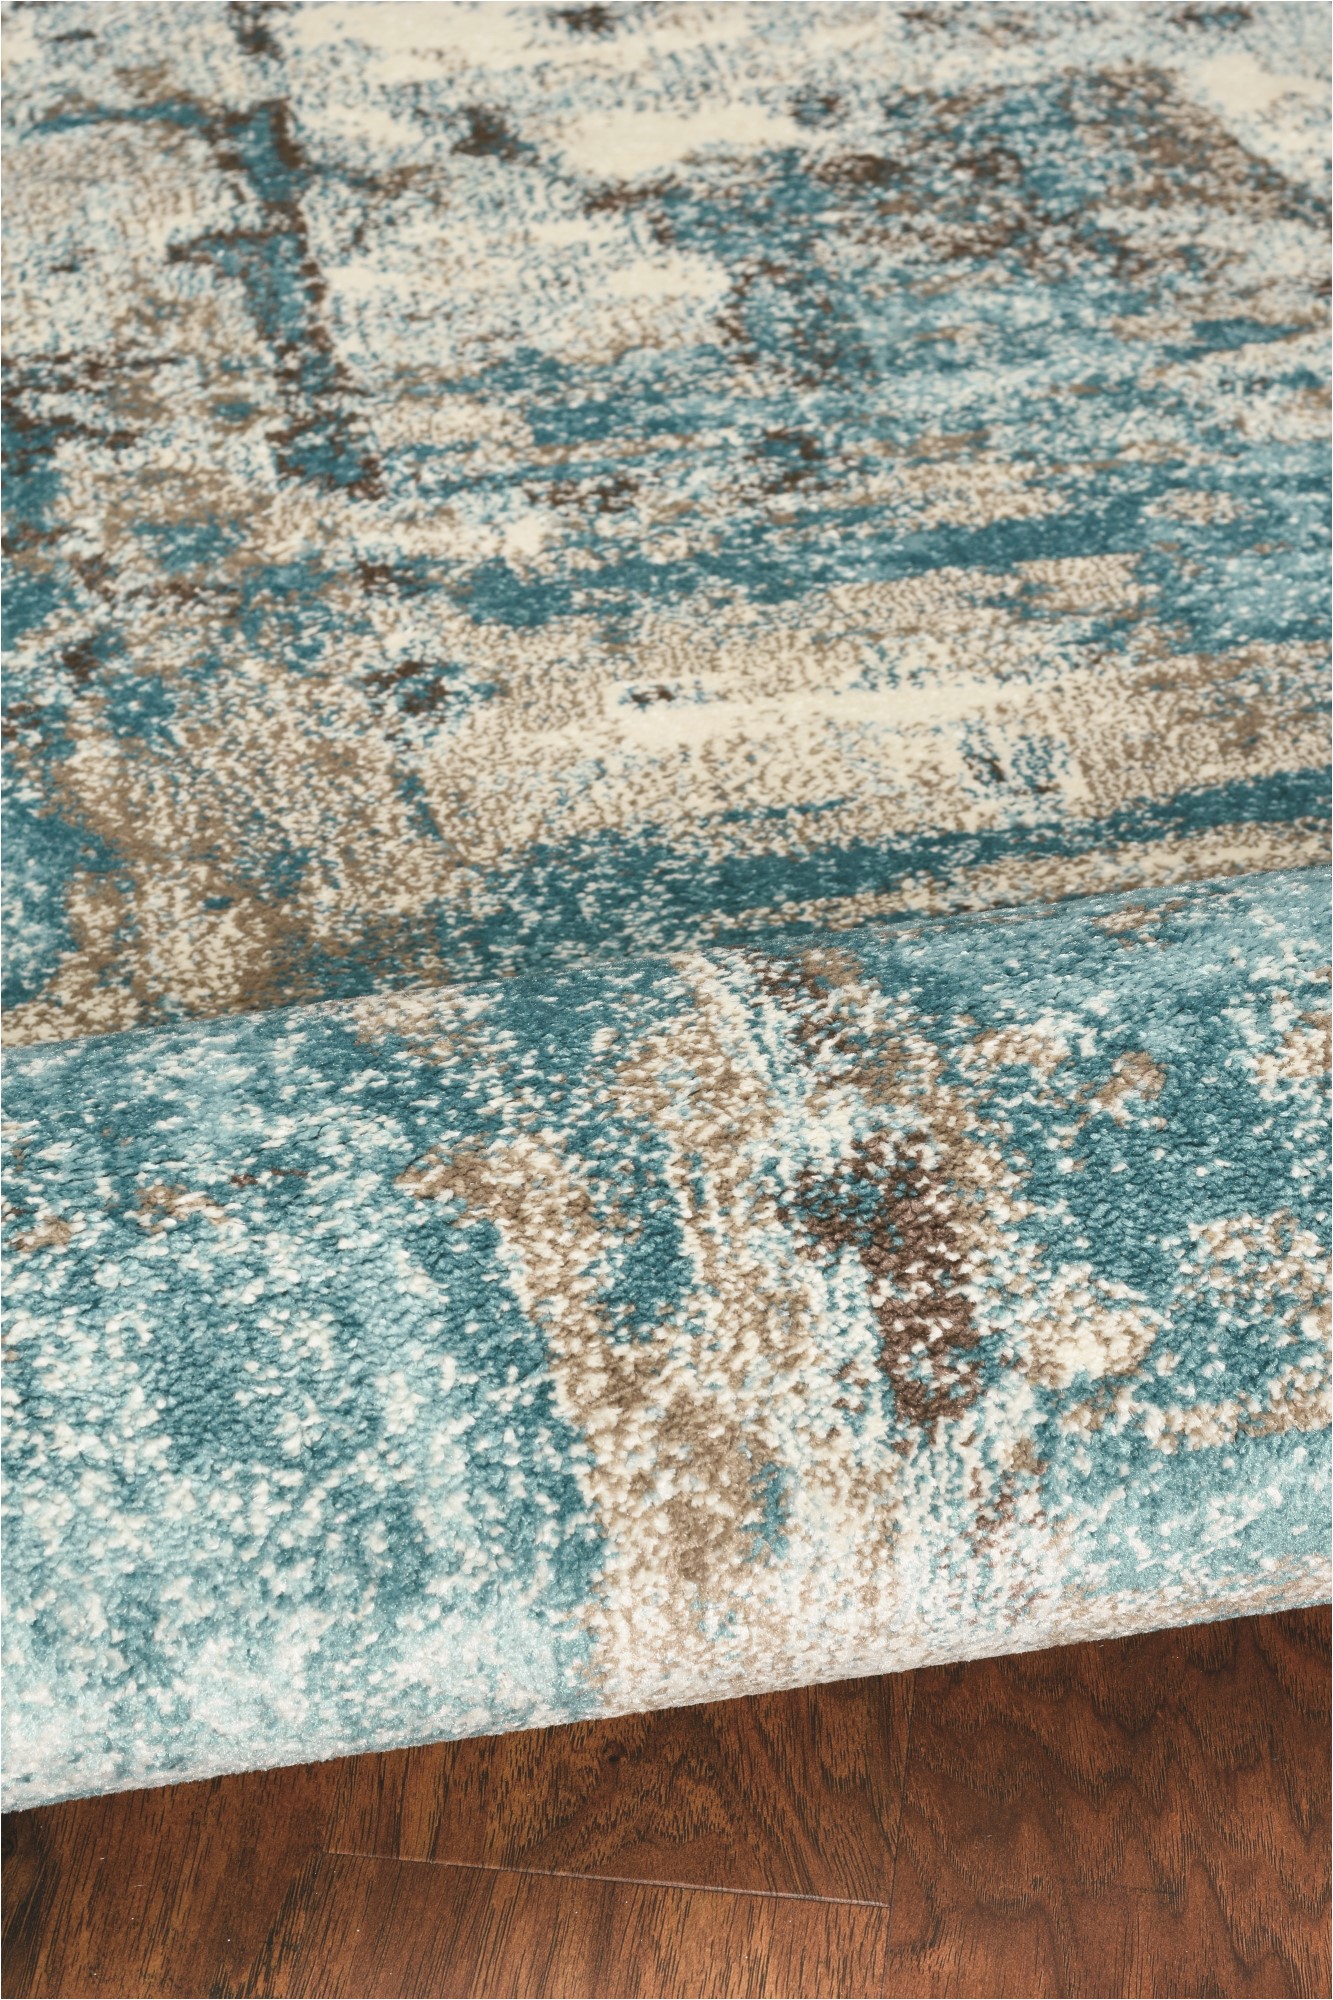 Teal and Ivory area Rugs Kas Watercolors Watercolors area Rugs